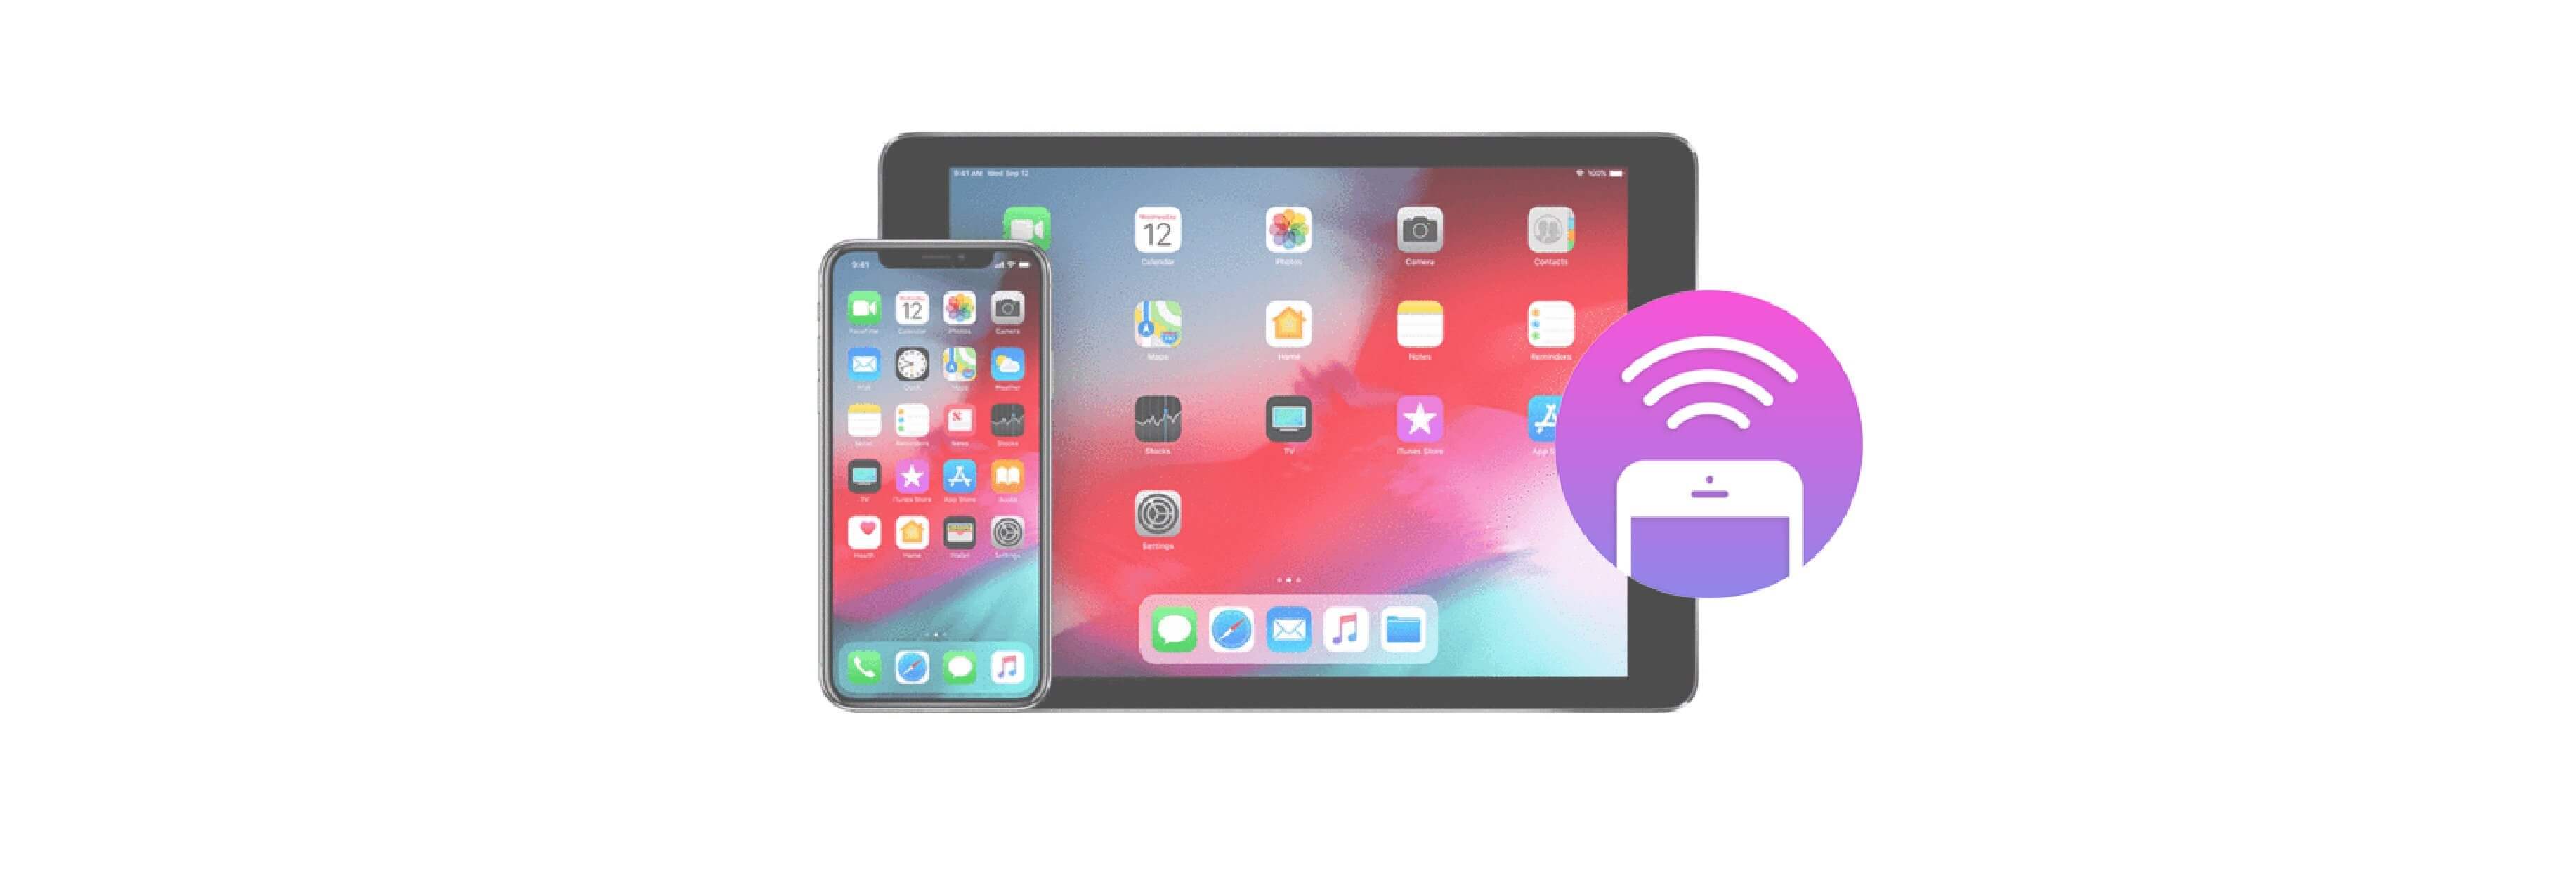 How to connect to an Instant Hotspot with your iPhone or iPad